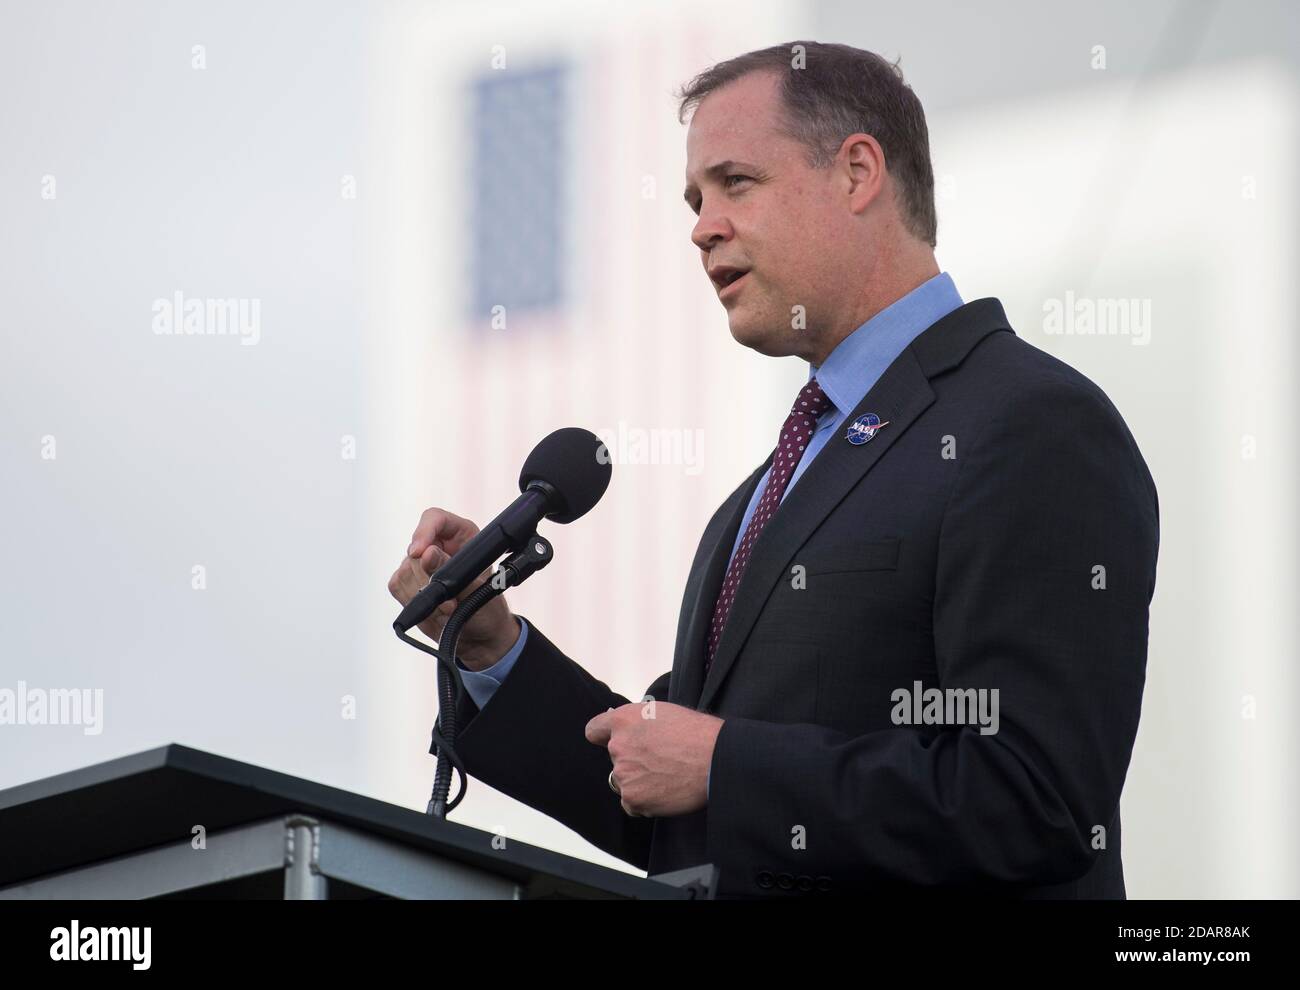 NASA Administrator Jim Bridenstine speaks to members of the media during a press conference ahead of the Crew-1 launch at the Kennedy Space Center November 13, 2020 in Cape Canaveral, Florida. Stock Photo